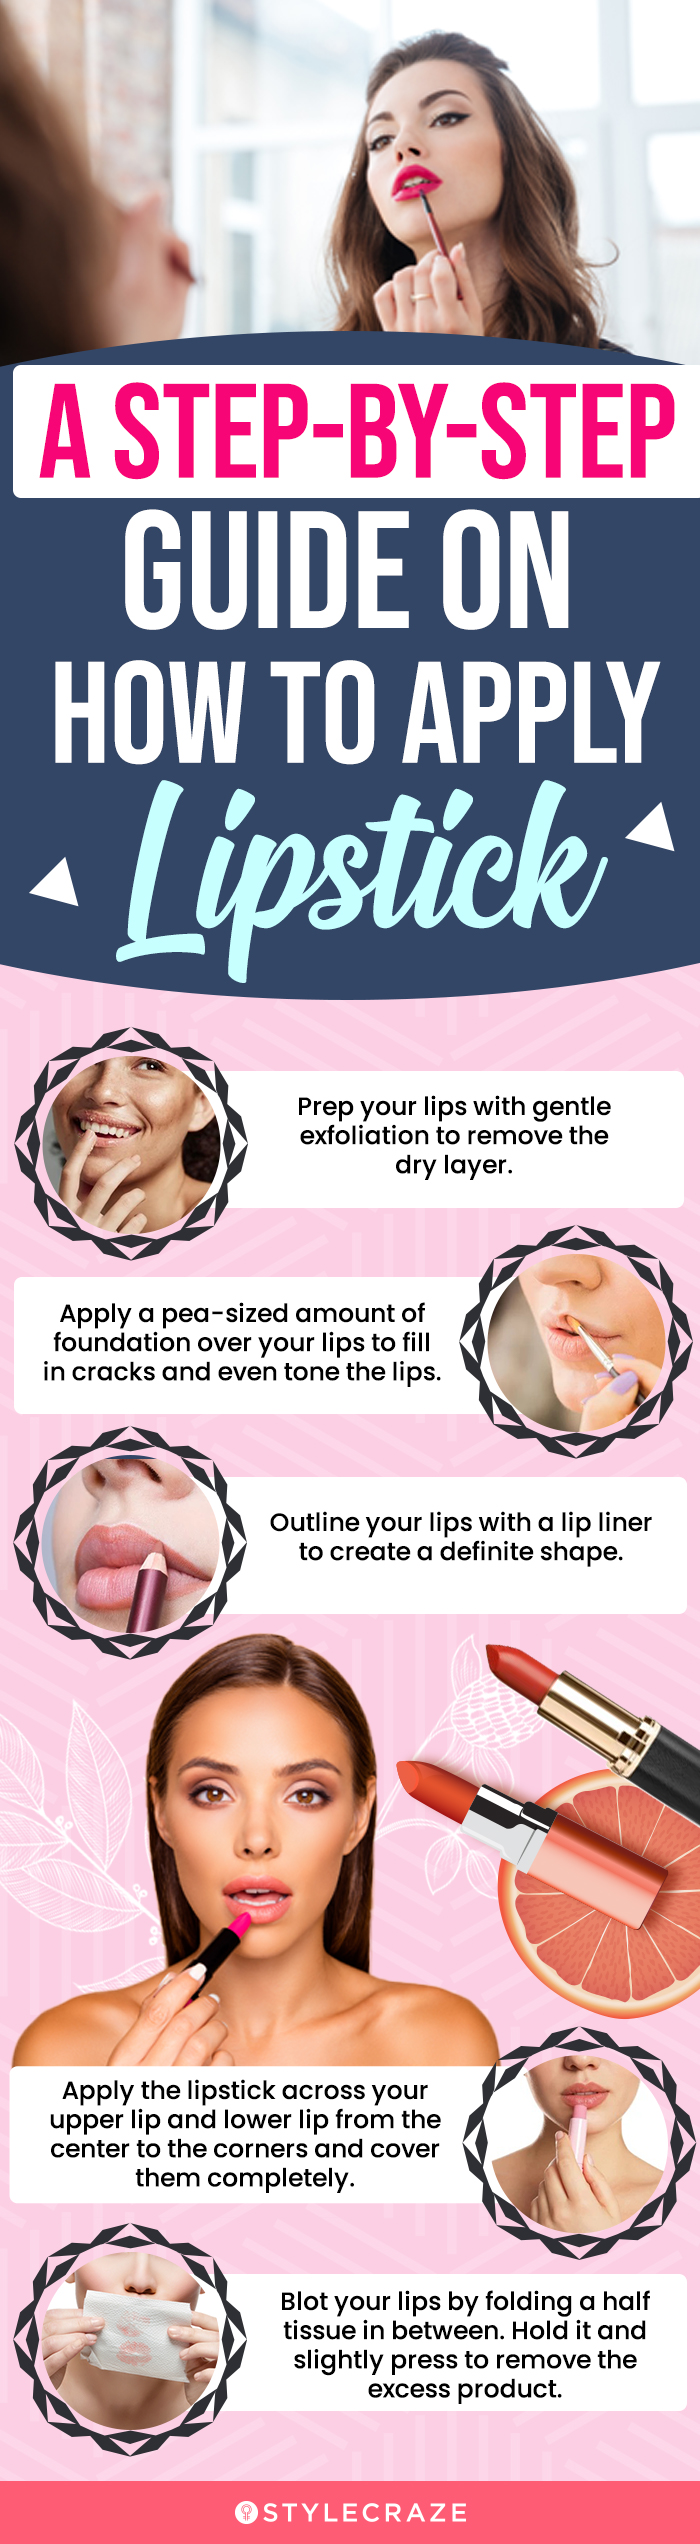 Step By Step Guide On How To Apply Lipstick (infographic)